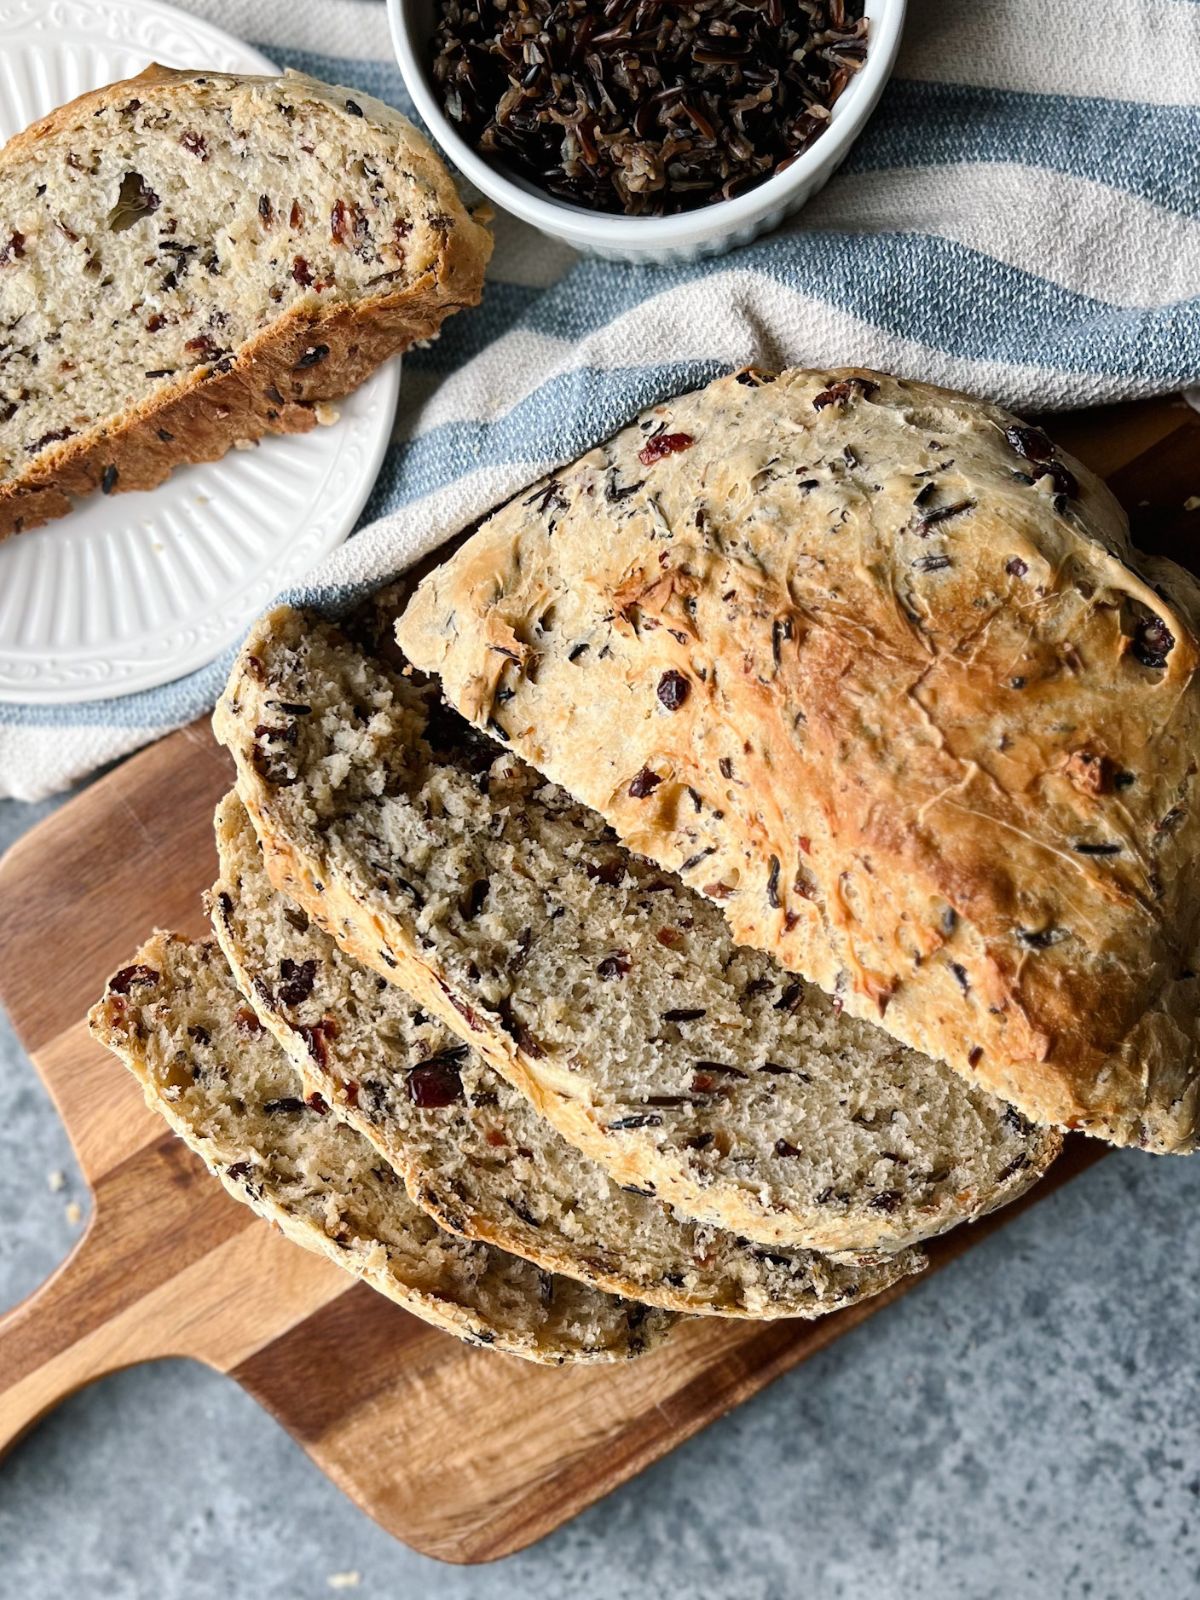 Loaf of cranberry wild rice bread on a wooden cutting board with a slice of bread on a plate next to it.